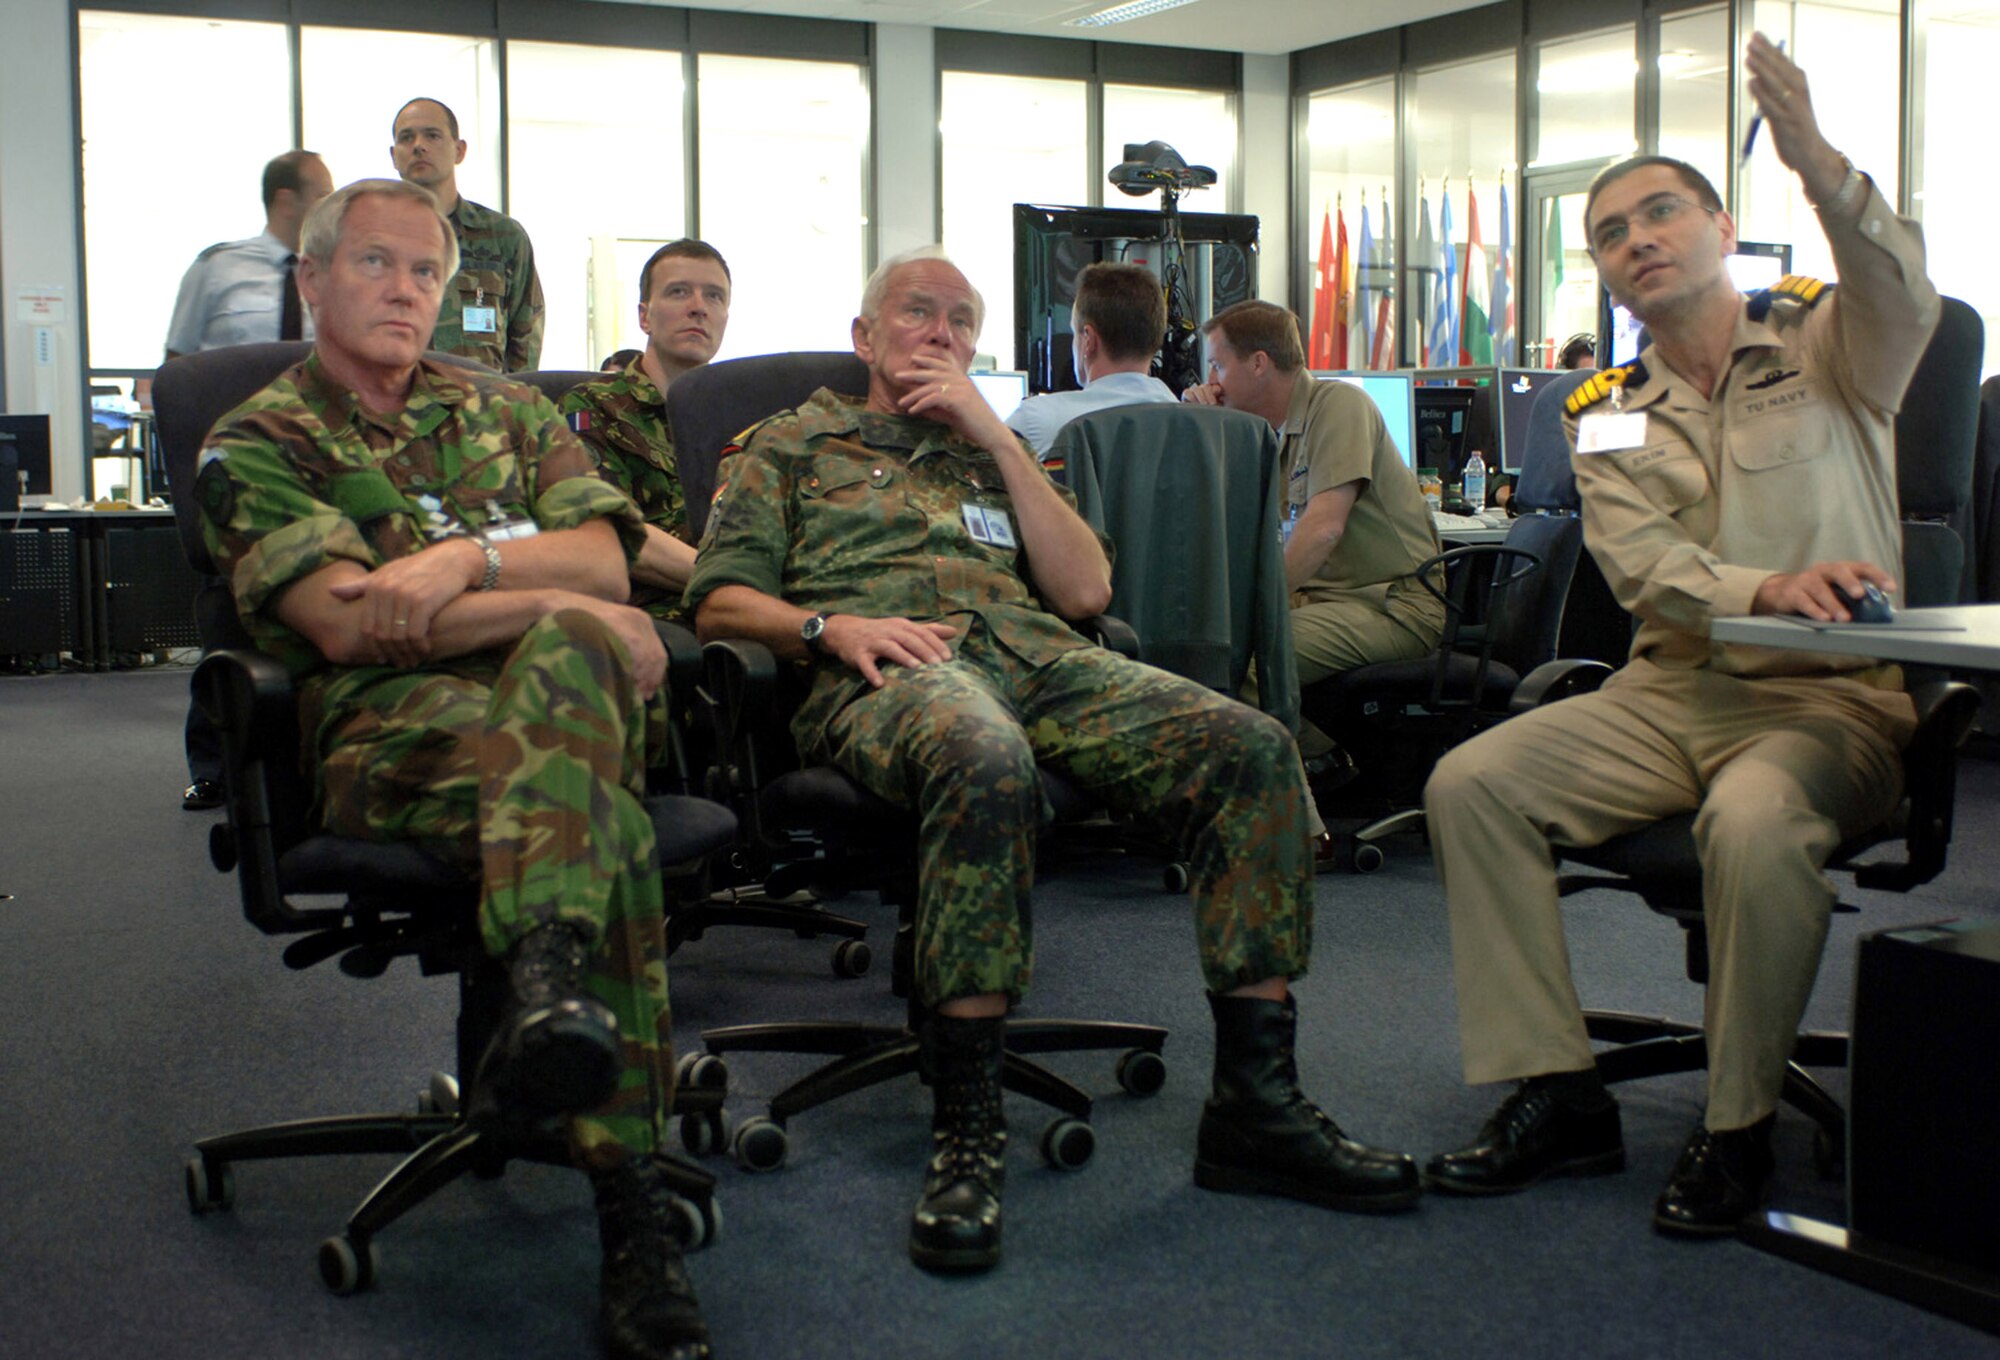 British Gen. Sir John Reith and German Gen. Ranier Shuwirth receive an operations brief May 3 from Turkish Naval Capt. Cengiz Ekin on an interactive software tool used to assess battlefield operations at Allied Air Component Command Headquarters at Ramstein Air Base, Germany. The NATO commanders and representatives from 26 NATO nations were attending the week-long NATO Response Force Exercise Allied Reach '07. General Reith is the deputy Supreme Allied Commander Europe, and General Shuwirth is the SHAPE chief of staff. (U.S. Air Force photo/Master Sgt. Scott Wagers)
